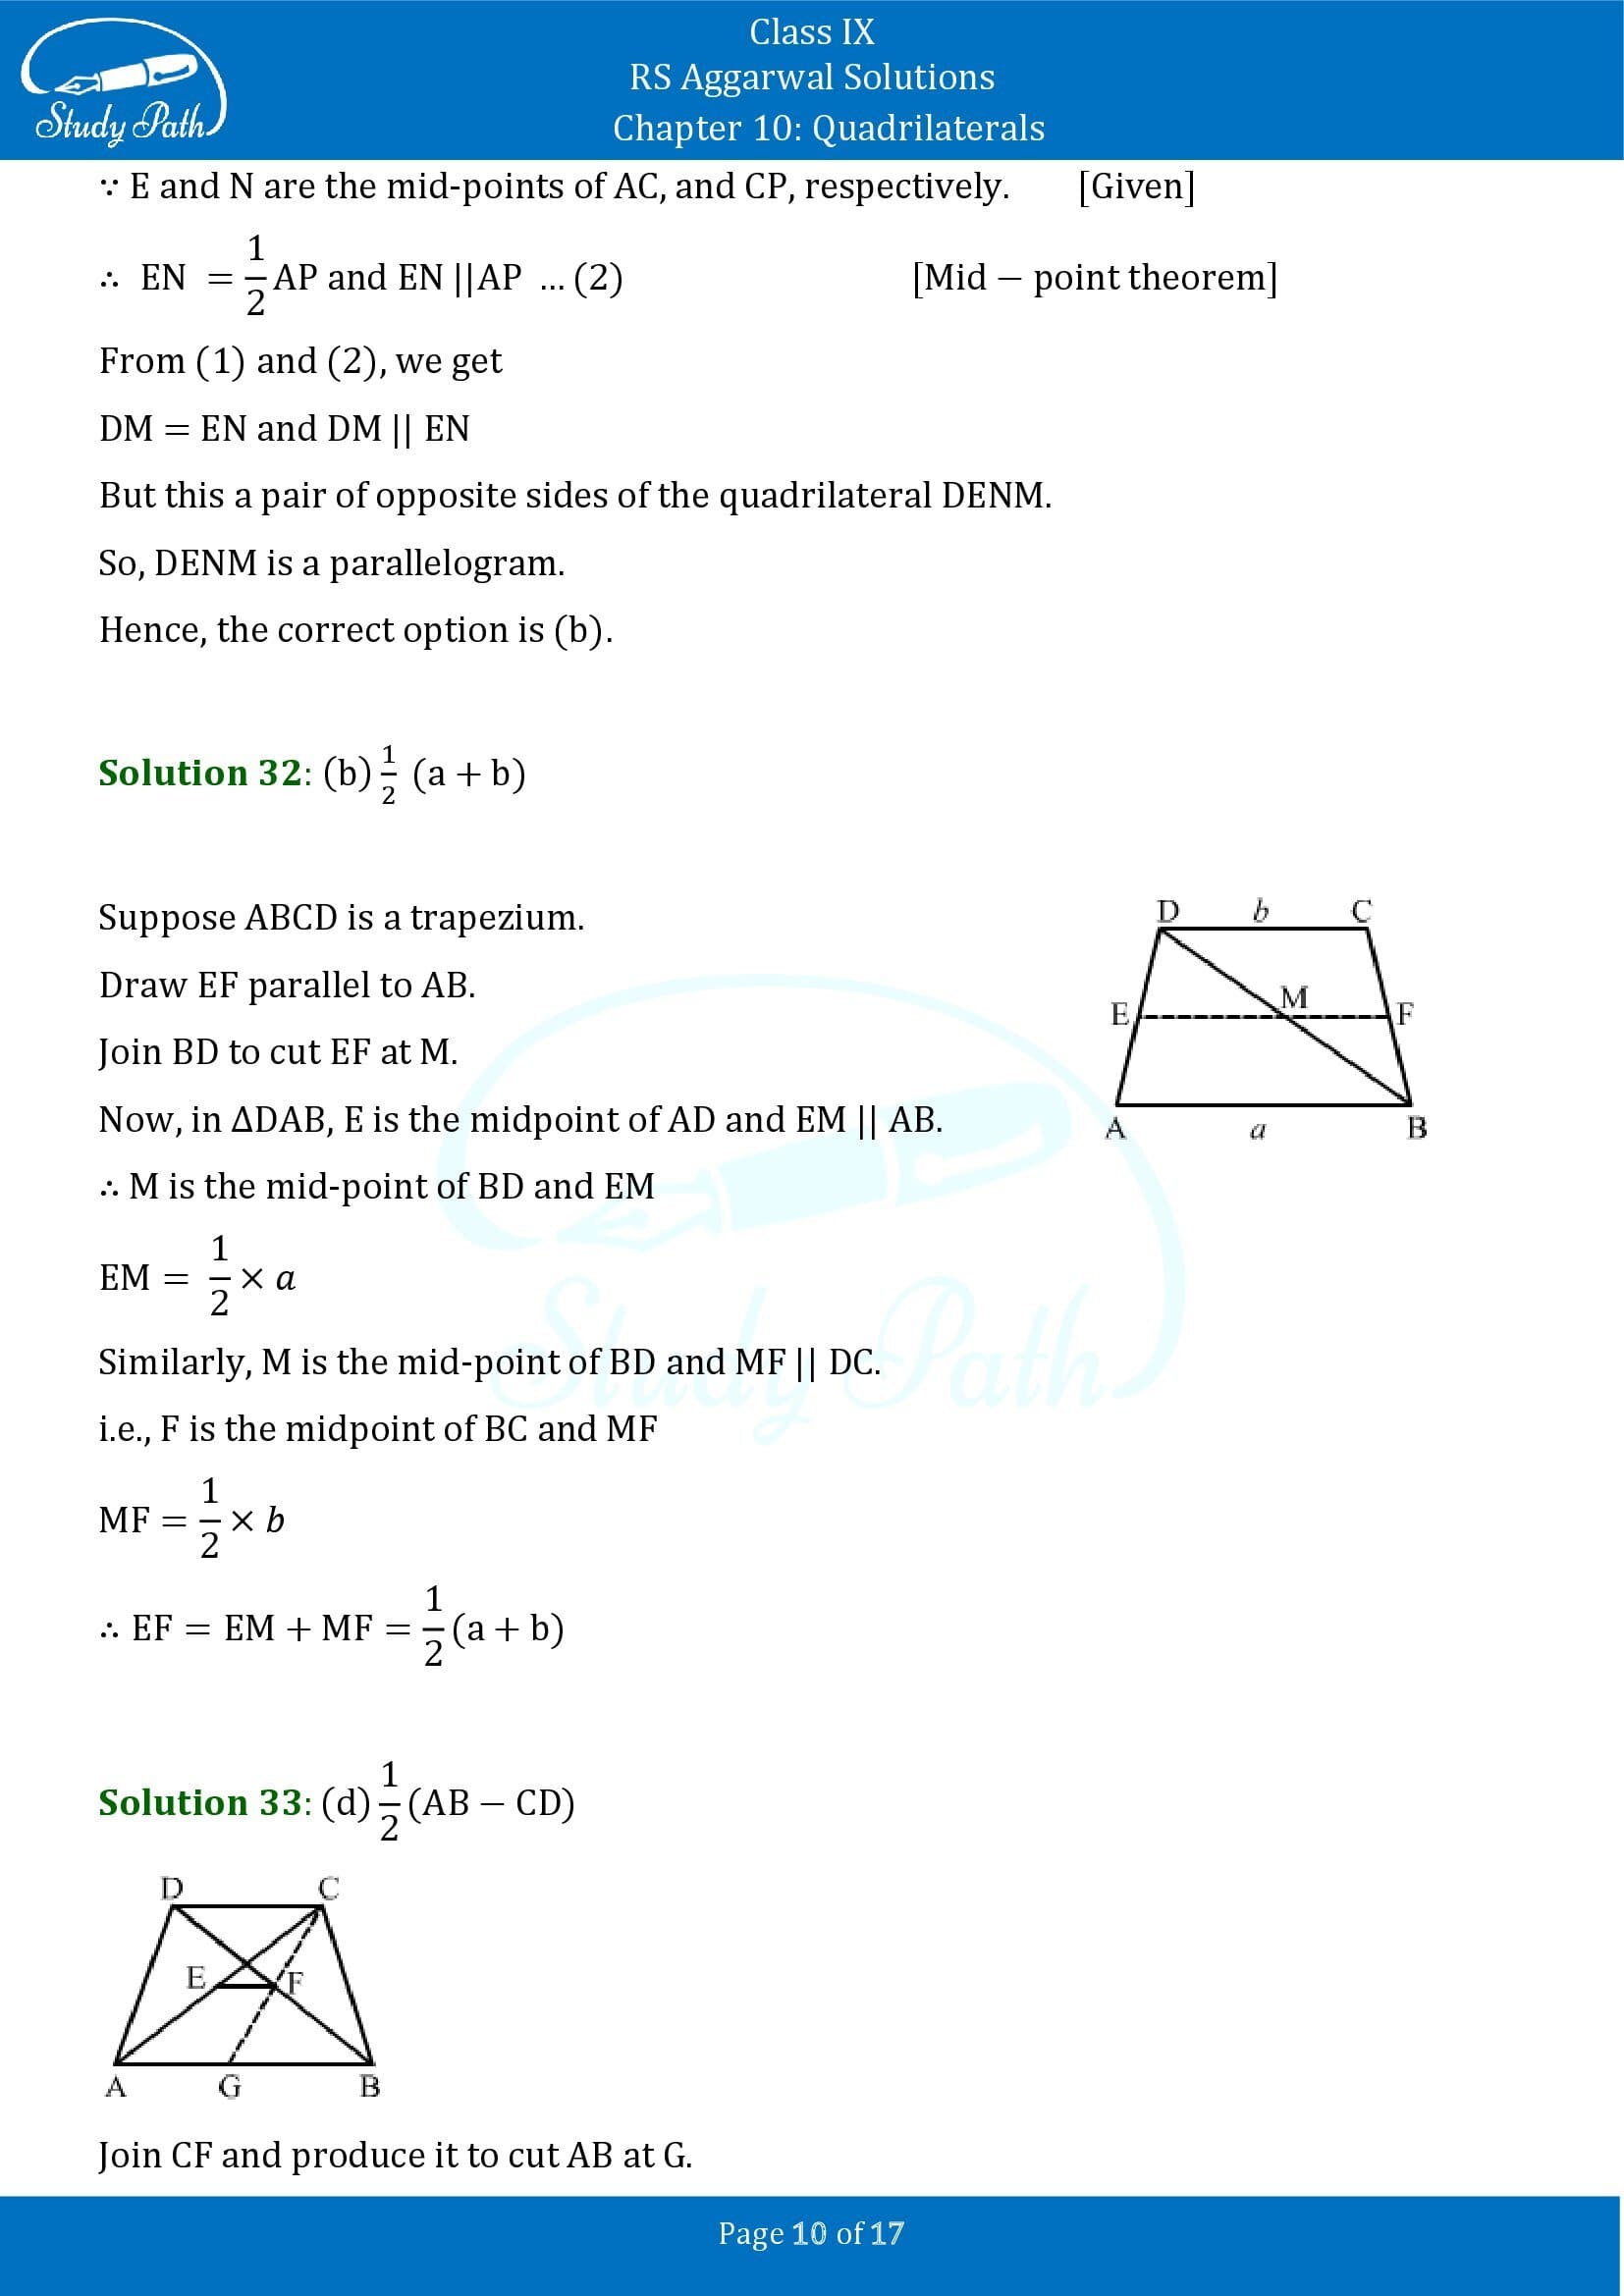 RS Aggarwal Solutions Class 9 Chapter 10 Quadrilaterals Multiple Choice Questions MCQs 00010